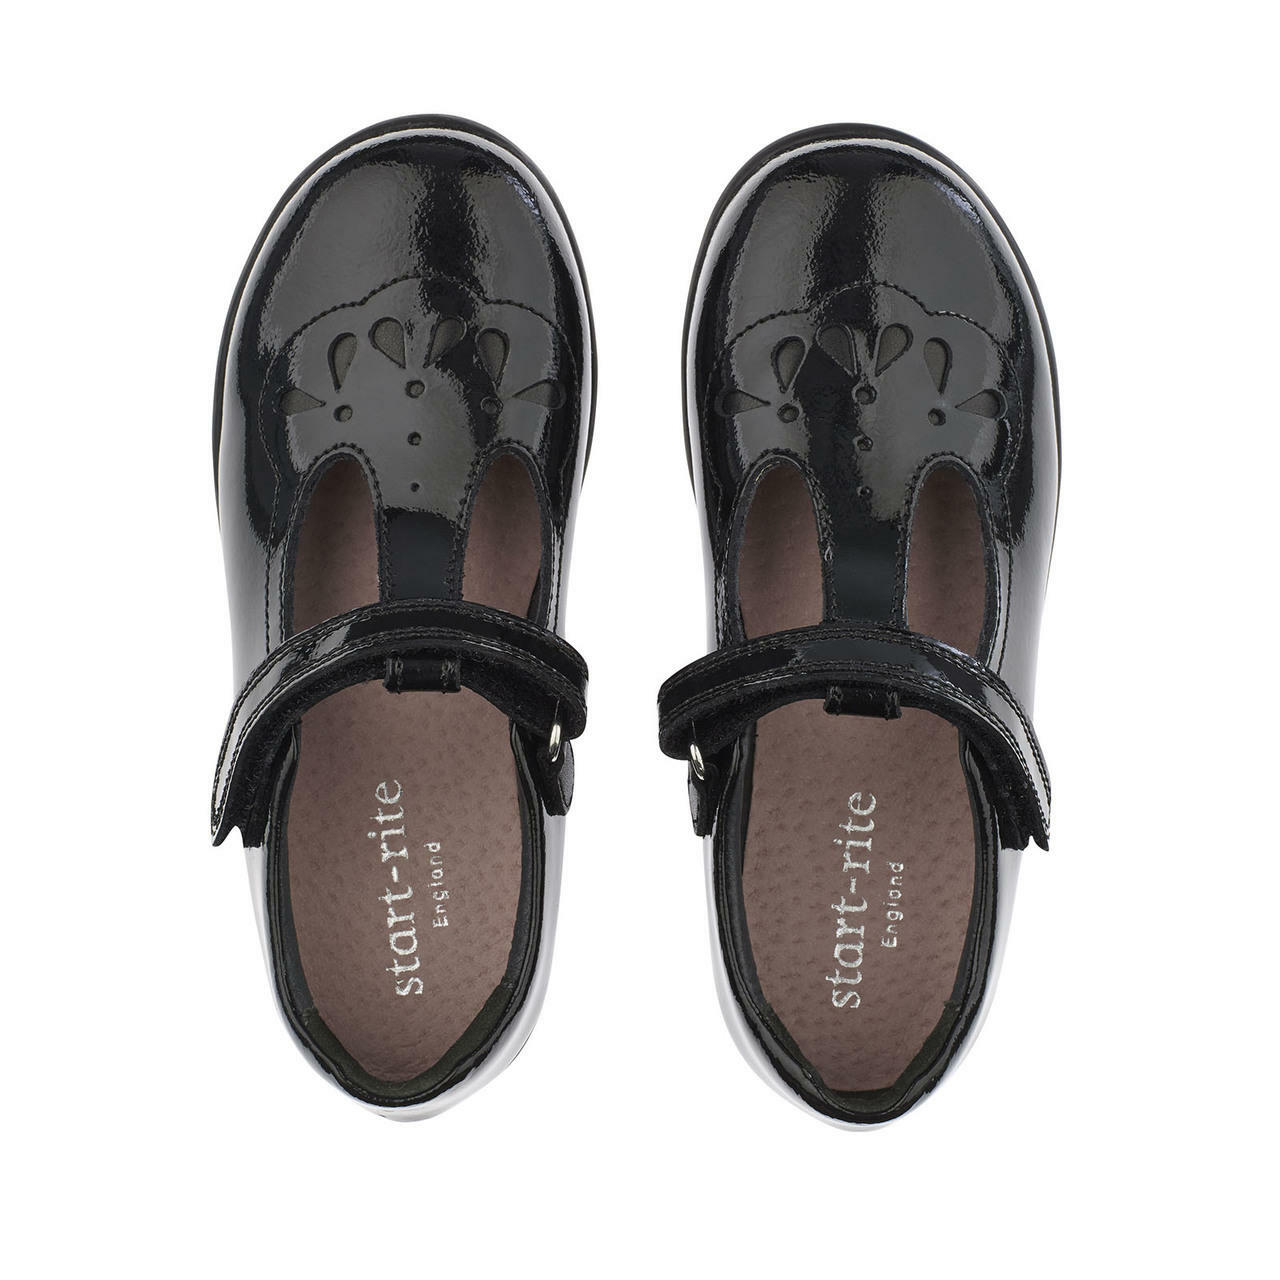 A pair of girls school shoes by Start Rite, style Poppy, in black patent with velcro fastening. Above view.